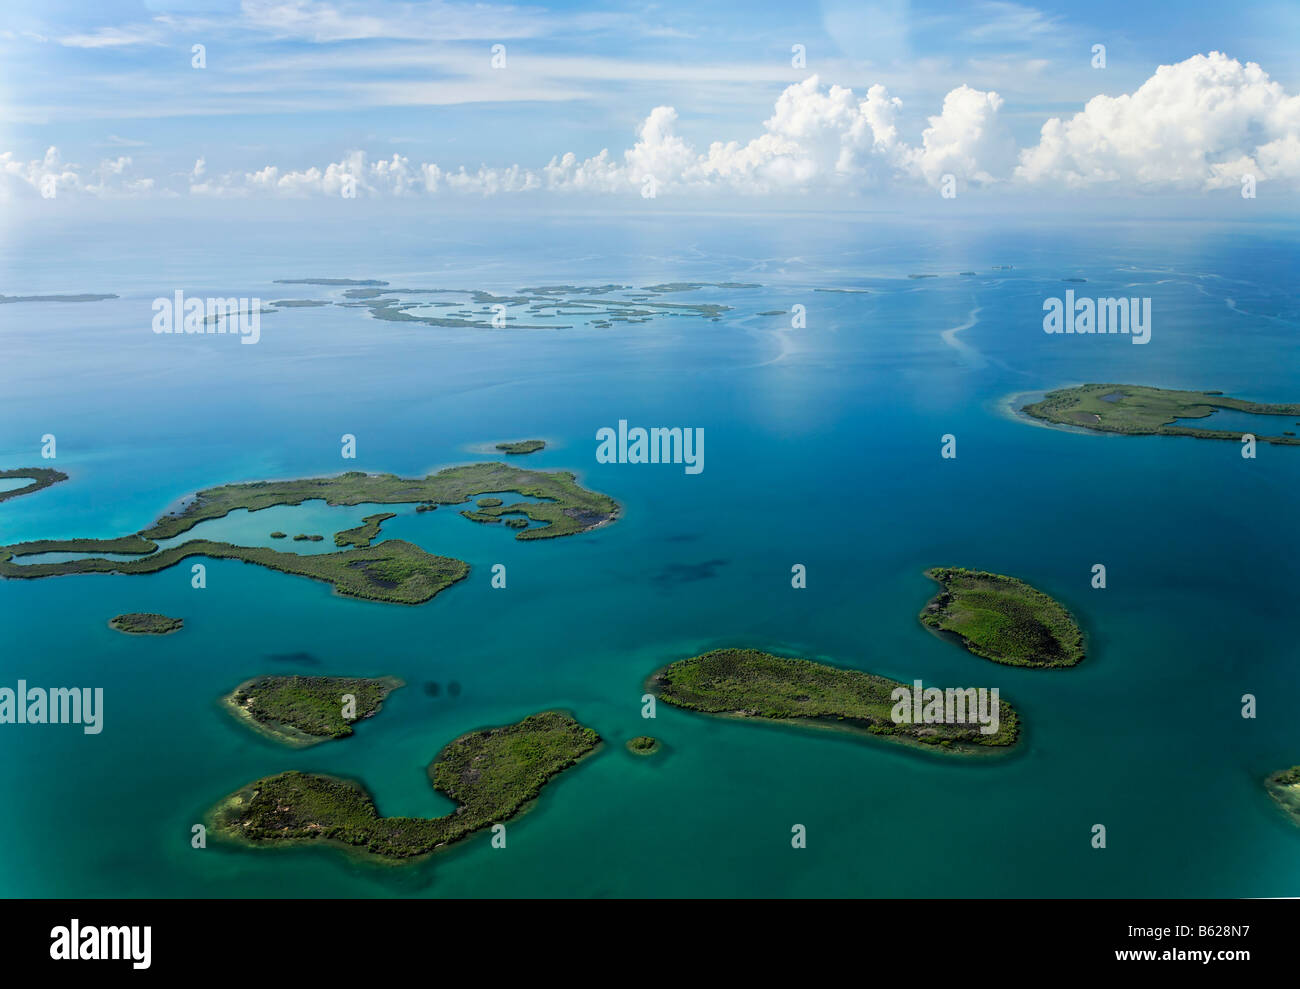 Mangroves in the ocean, aerial picture, coast between Dagria and Punta Gorda, Belize, Central America, Caribbean Stock Photo